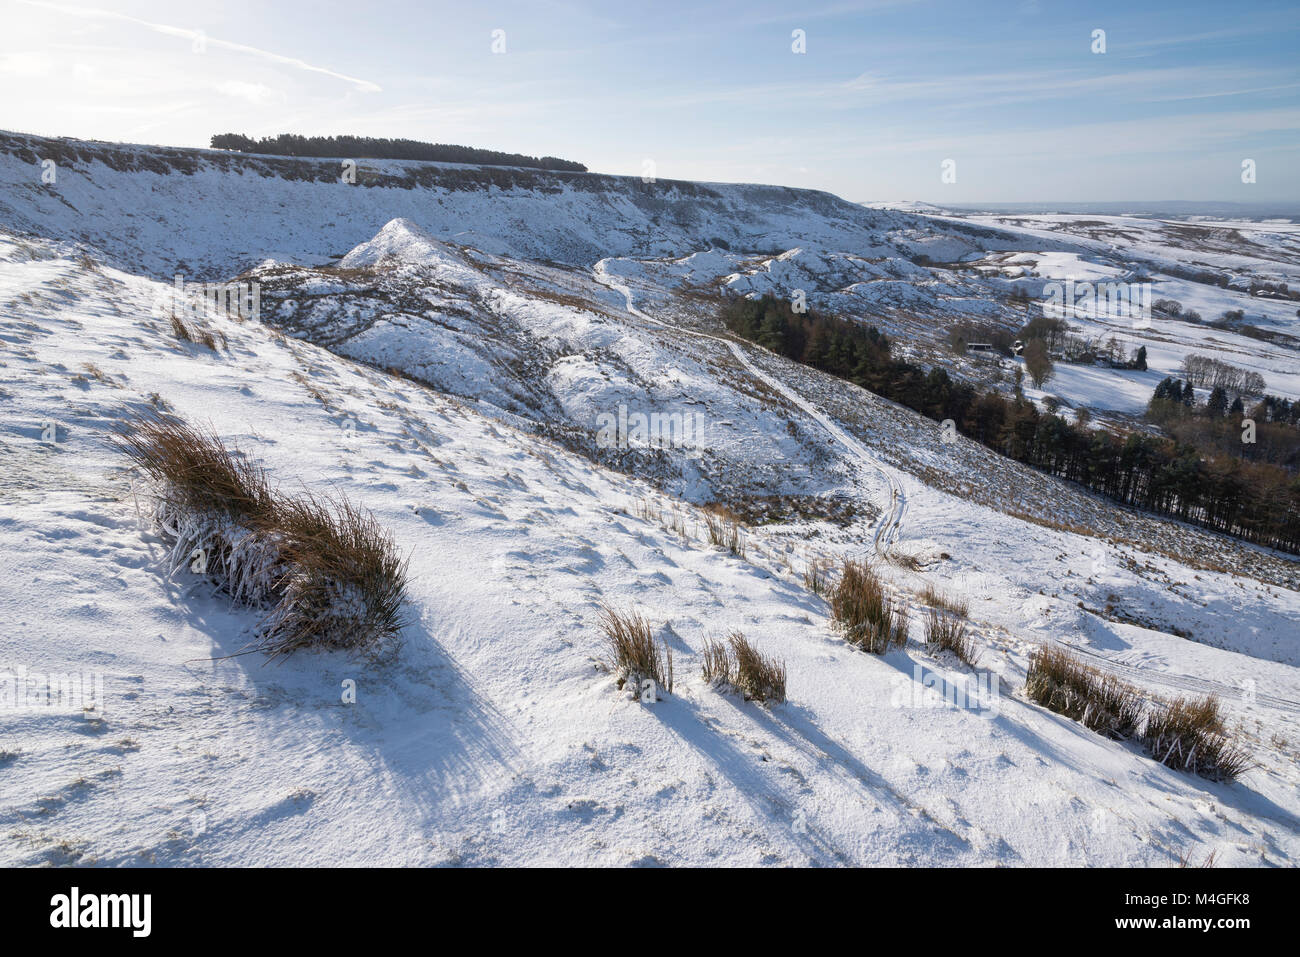 Snowy February day on Coombes edge, Charlesworth, Derbyshire. A hilly landscape in Northern England. Stock Photo